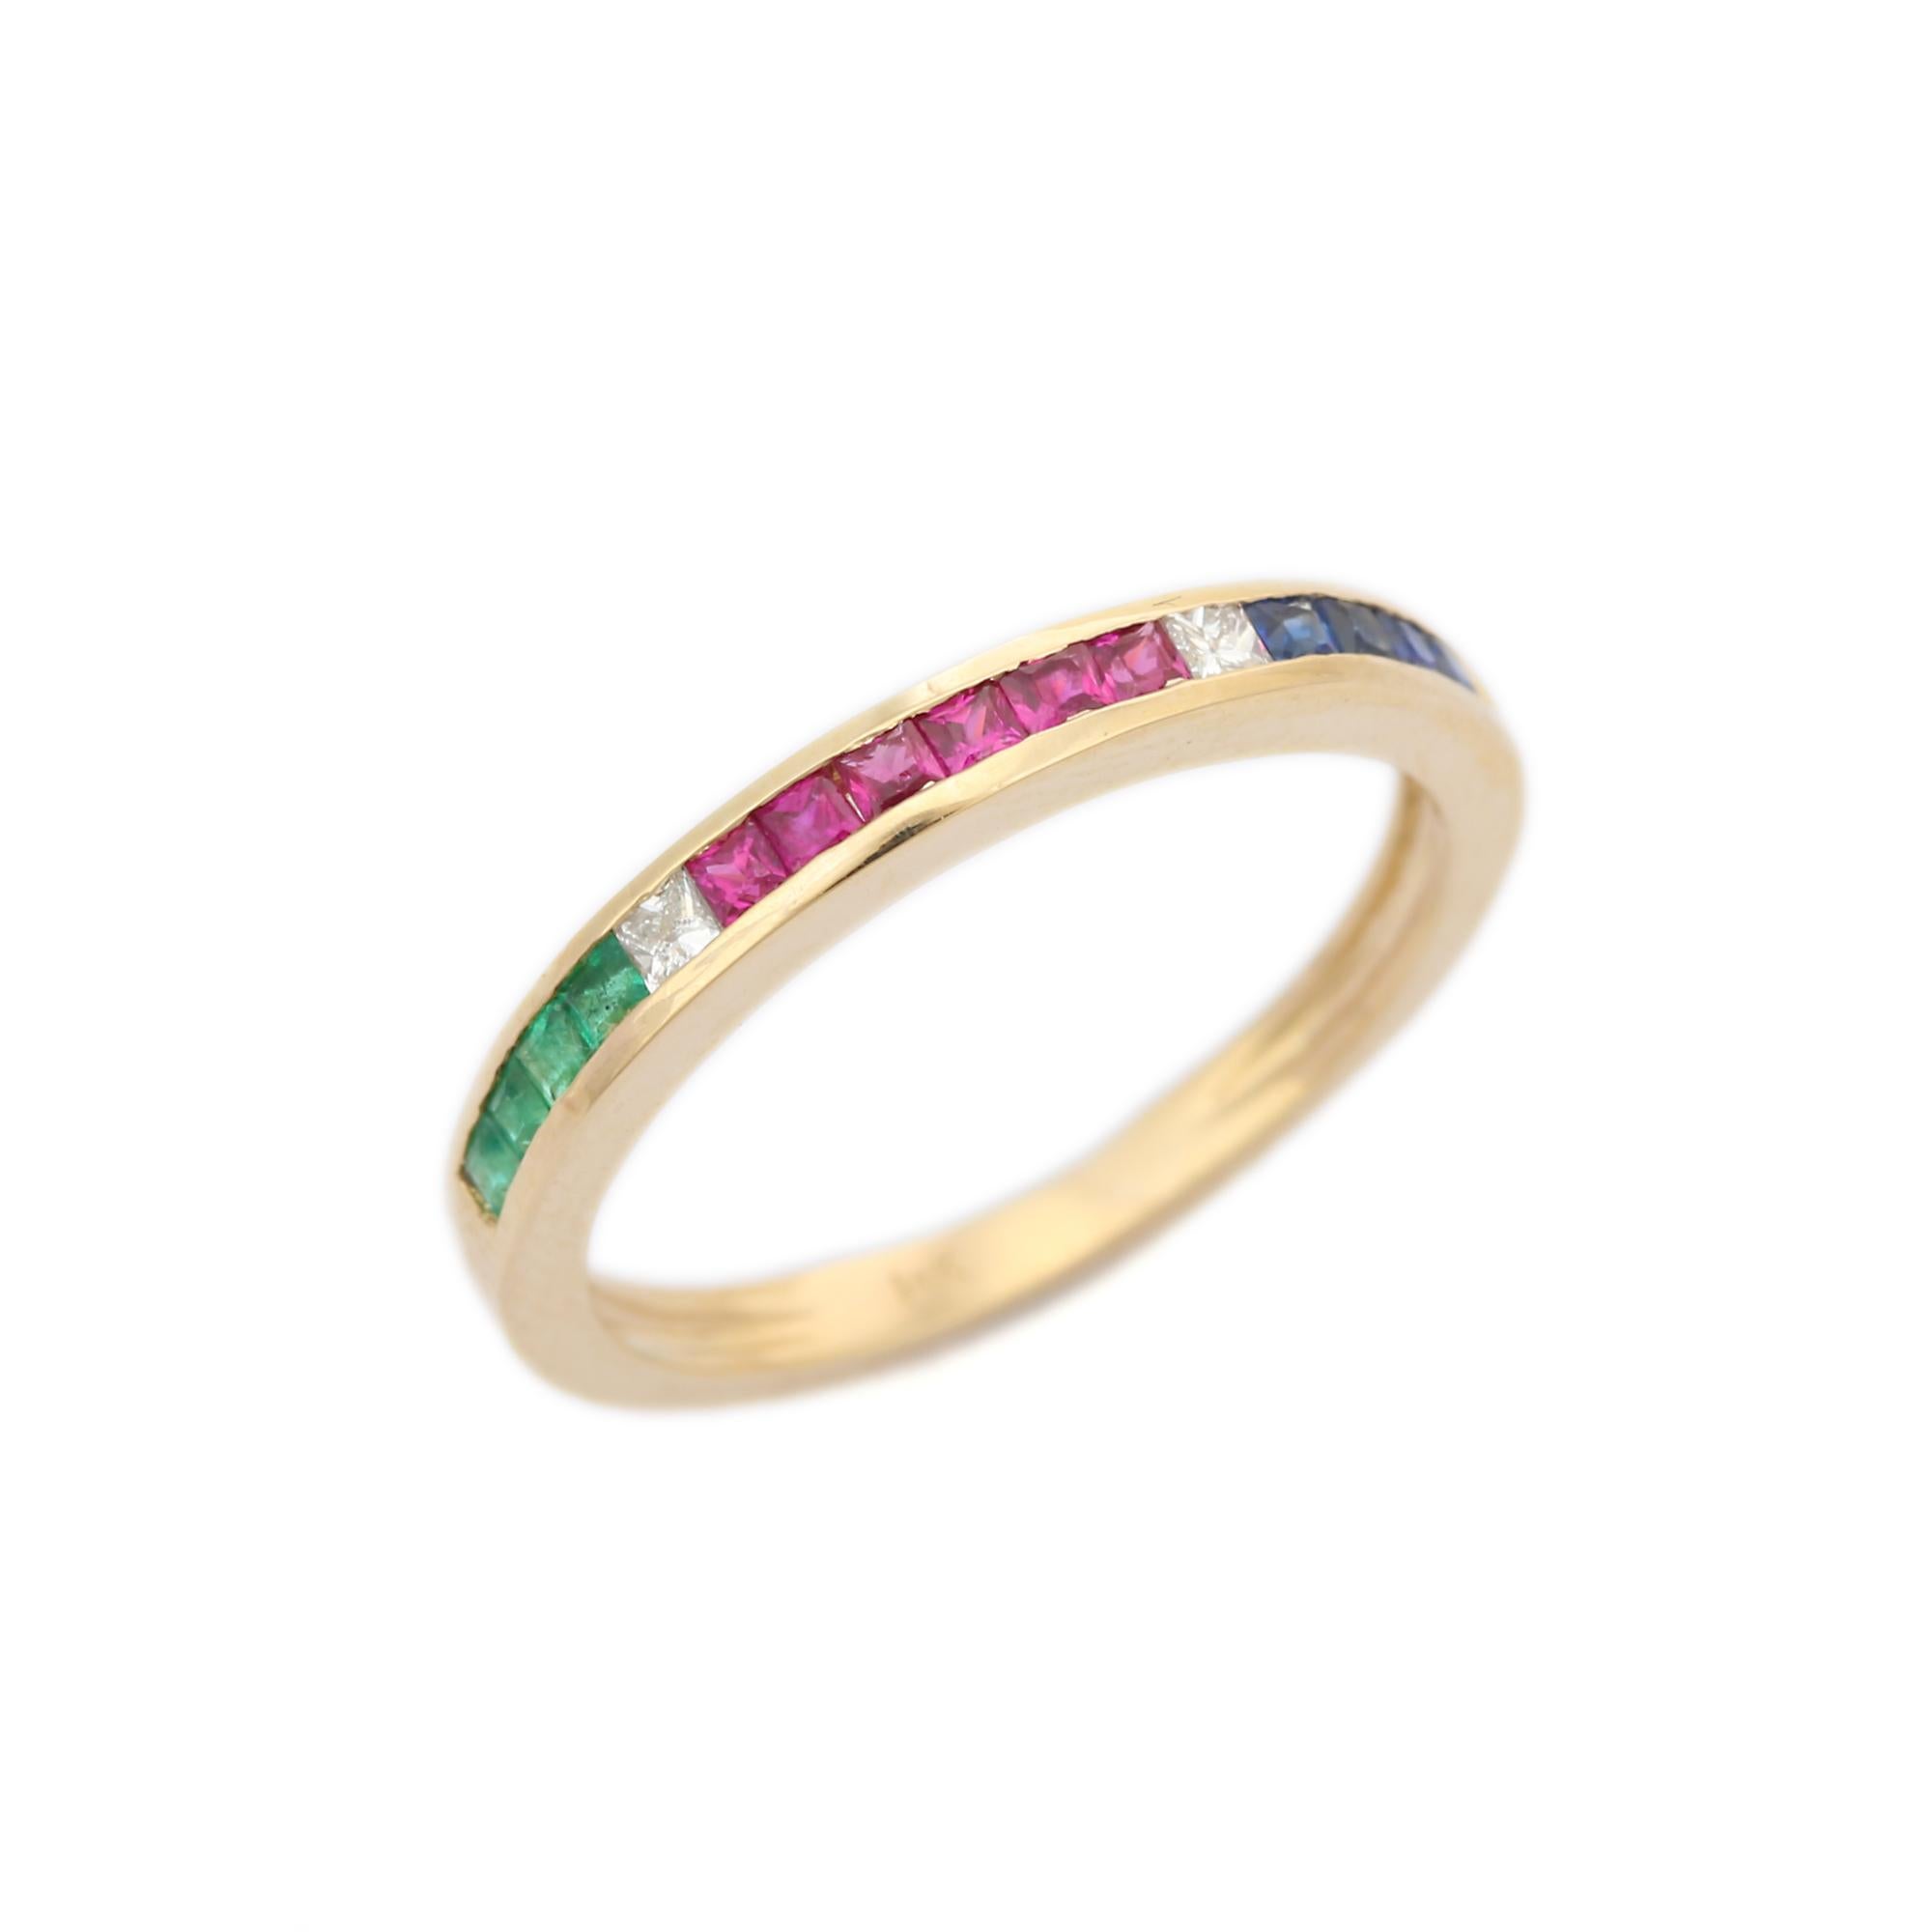 For Sale:  Stackable Emerald, Ruby and Sapphire Band Ring in 14k Solid Yellow Gold 5